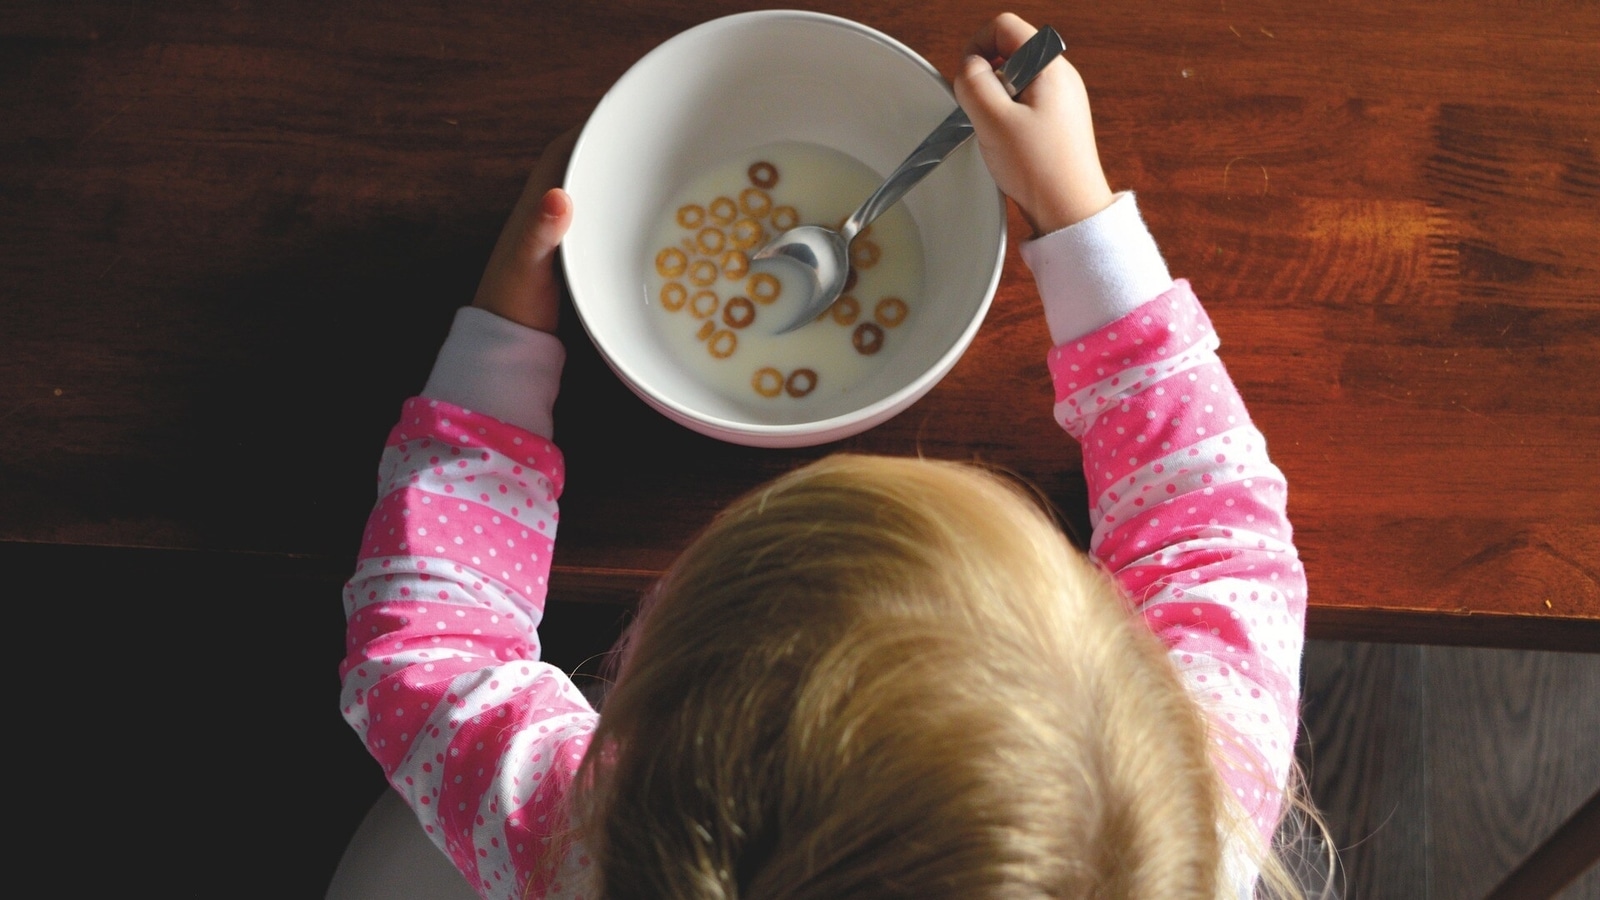 children-who-skip-breakfast-may-experience-psychosocial-health-problem-research